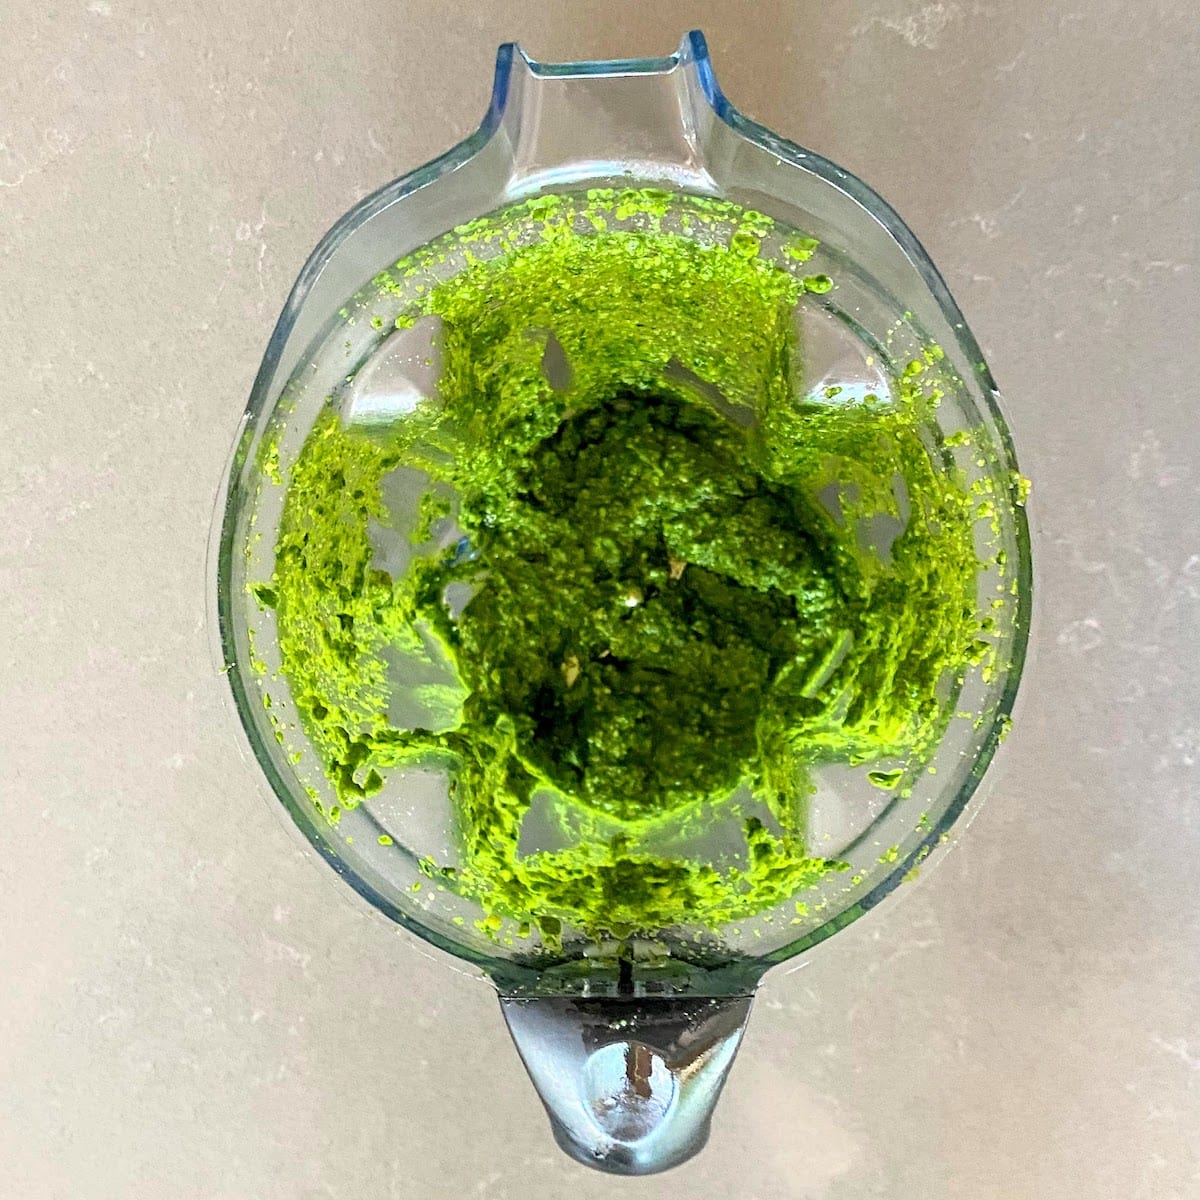 blended spinach pesto in vitamix container